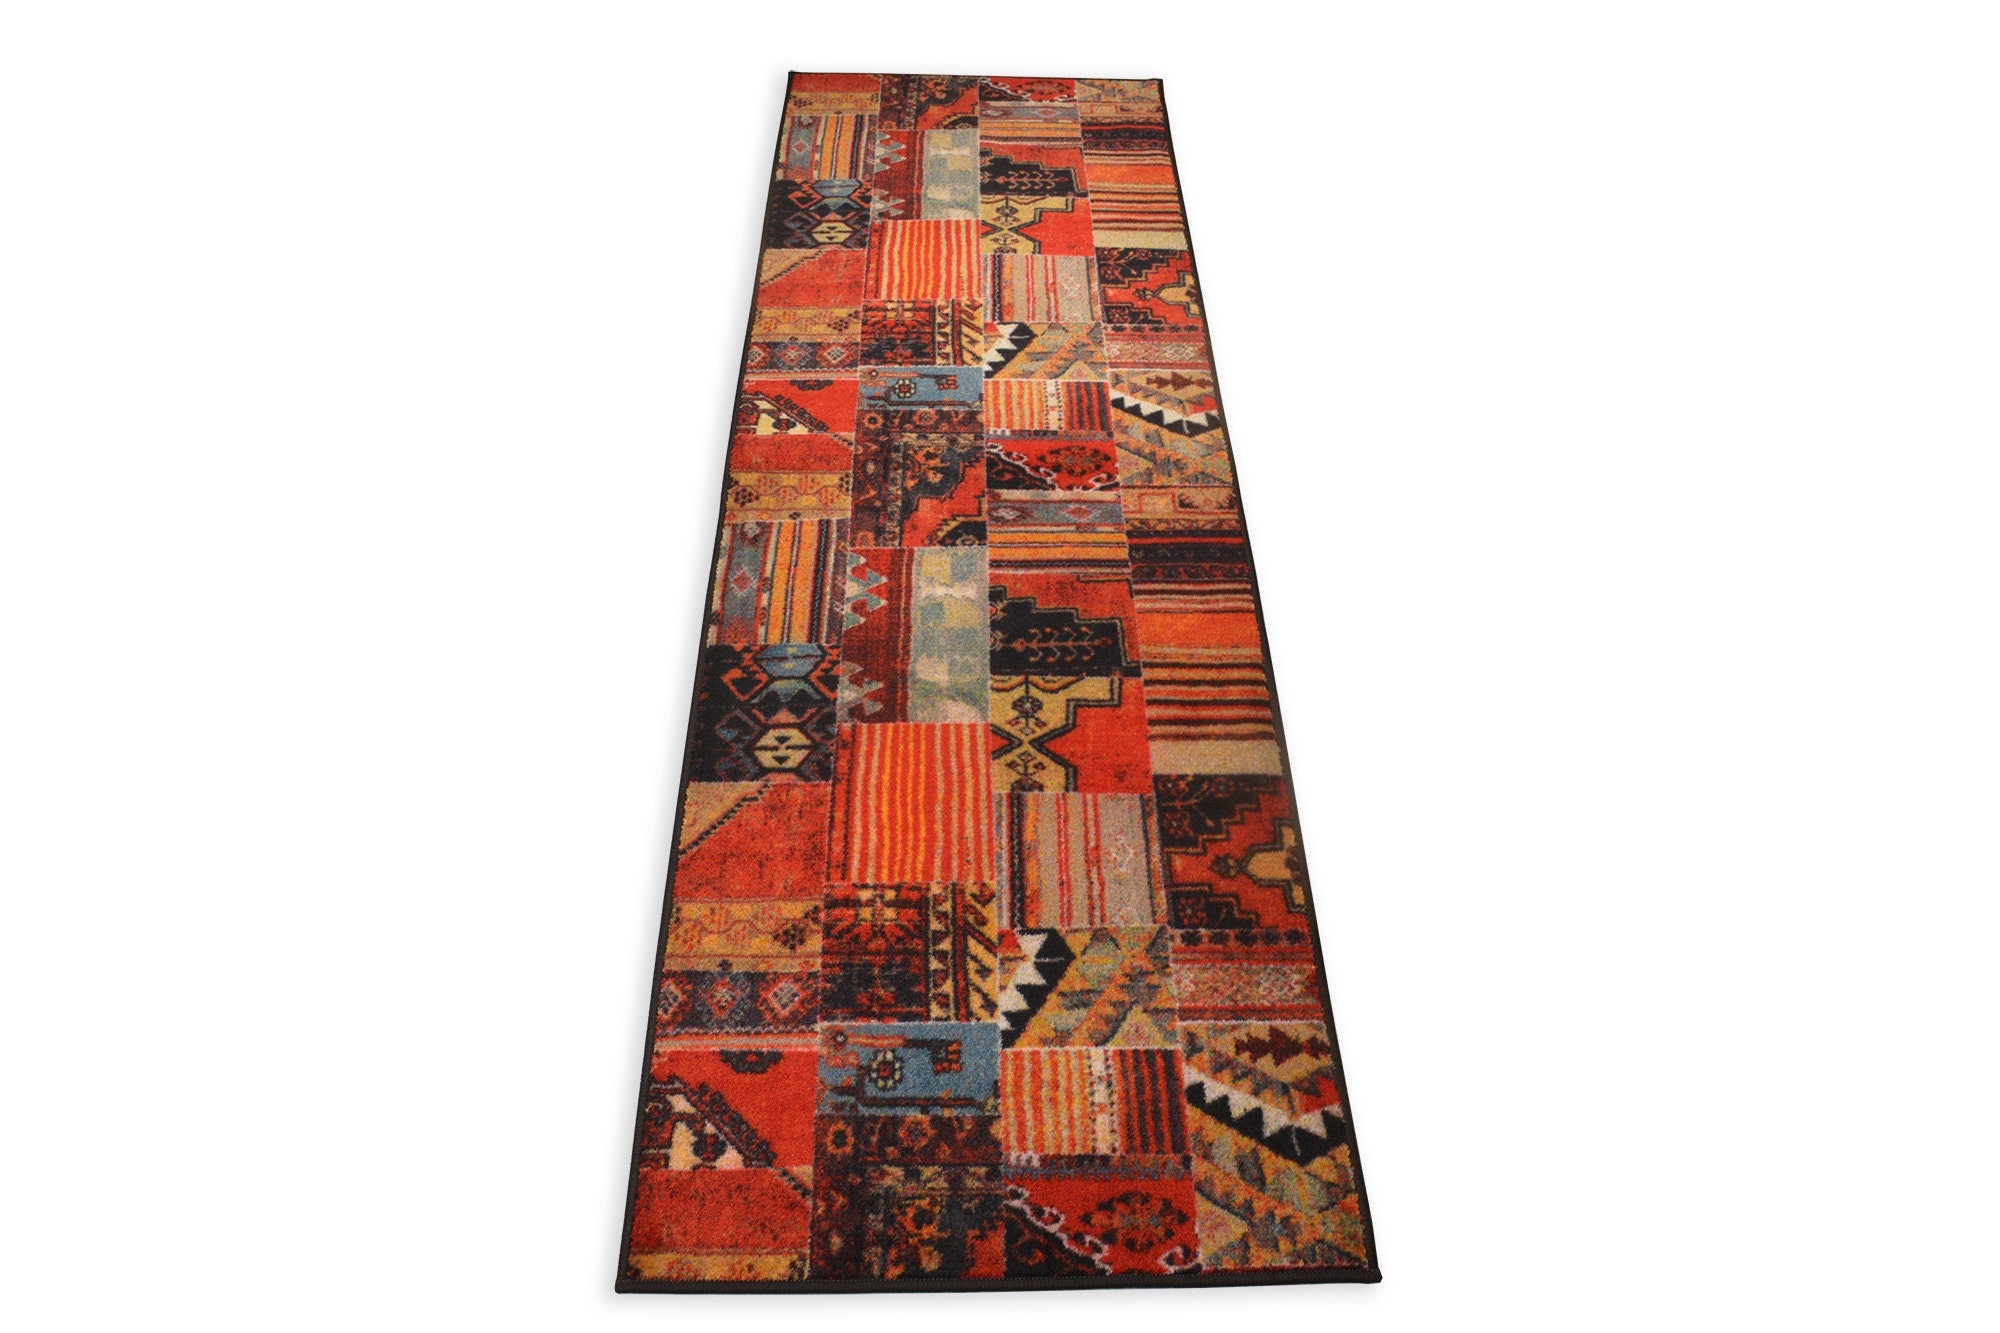 Custom Size Runner Rug Antique Patchwork Kilim Design Natural Cotton Backing Pick Your Own Size By Up to 50 Ft Length, 26", 35" Width - 0